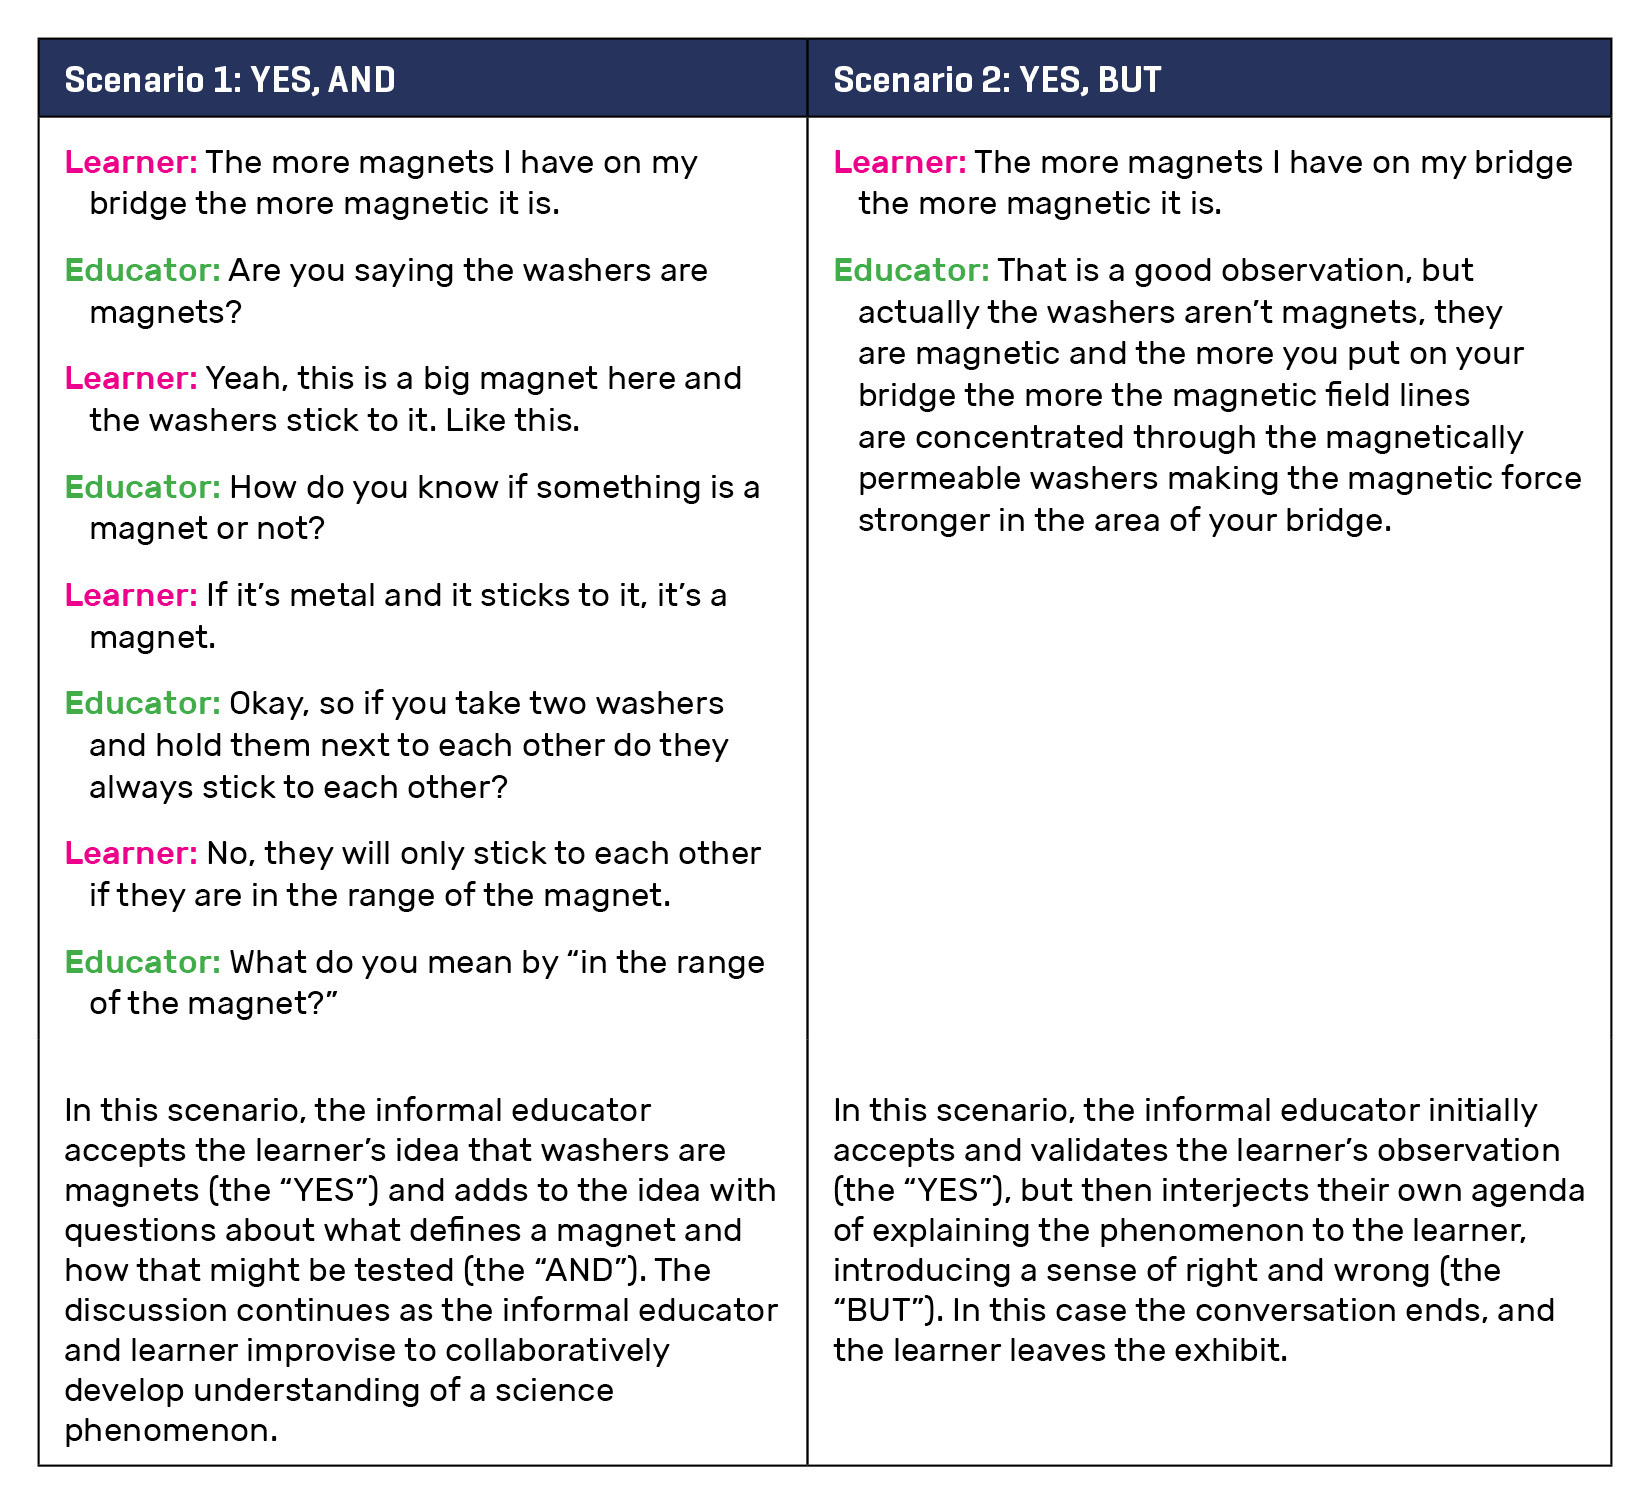 Table 1 Examples of “YES, AND” and “YES, BUT” interactions. Scenario 1 is an actual observed interaction between an informal educator and a 4th grade student. Scenario 2 is a hypothetical example based on the same student idea.